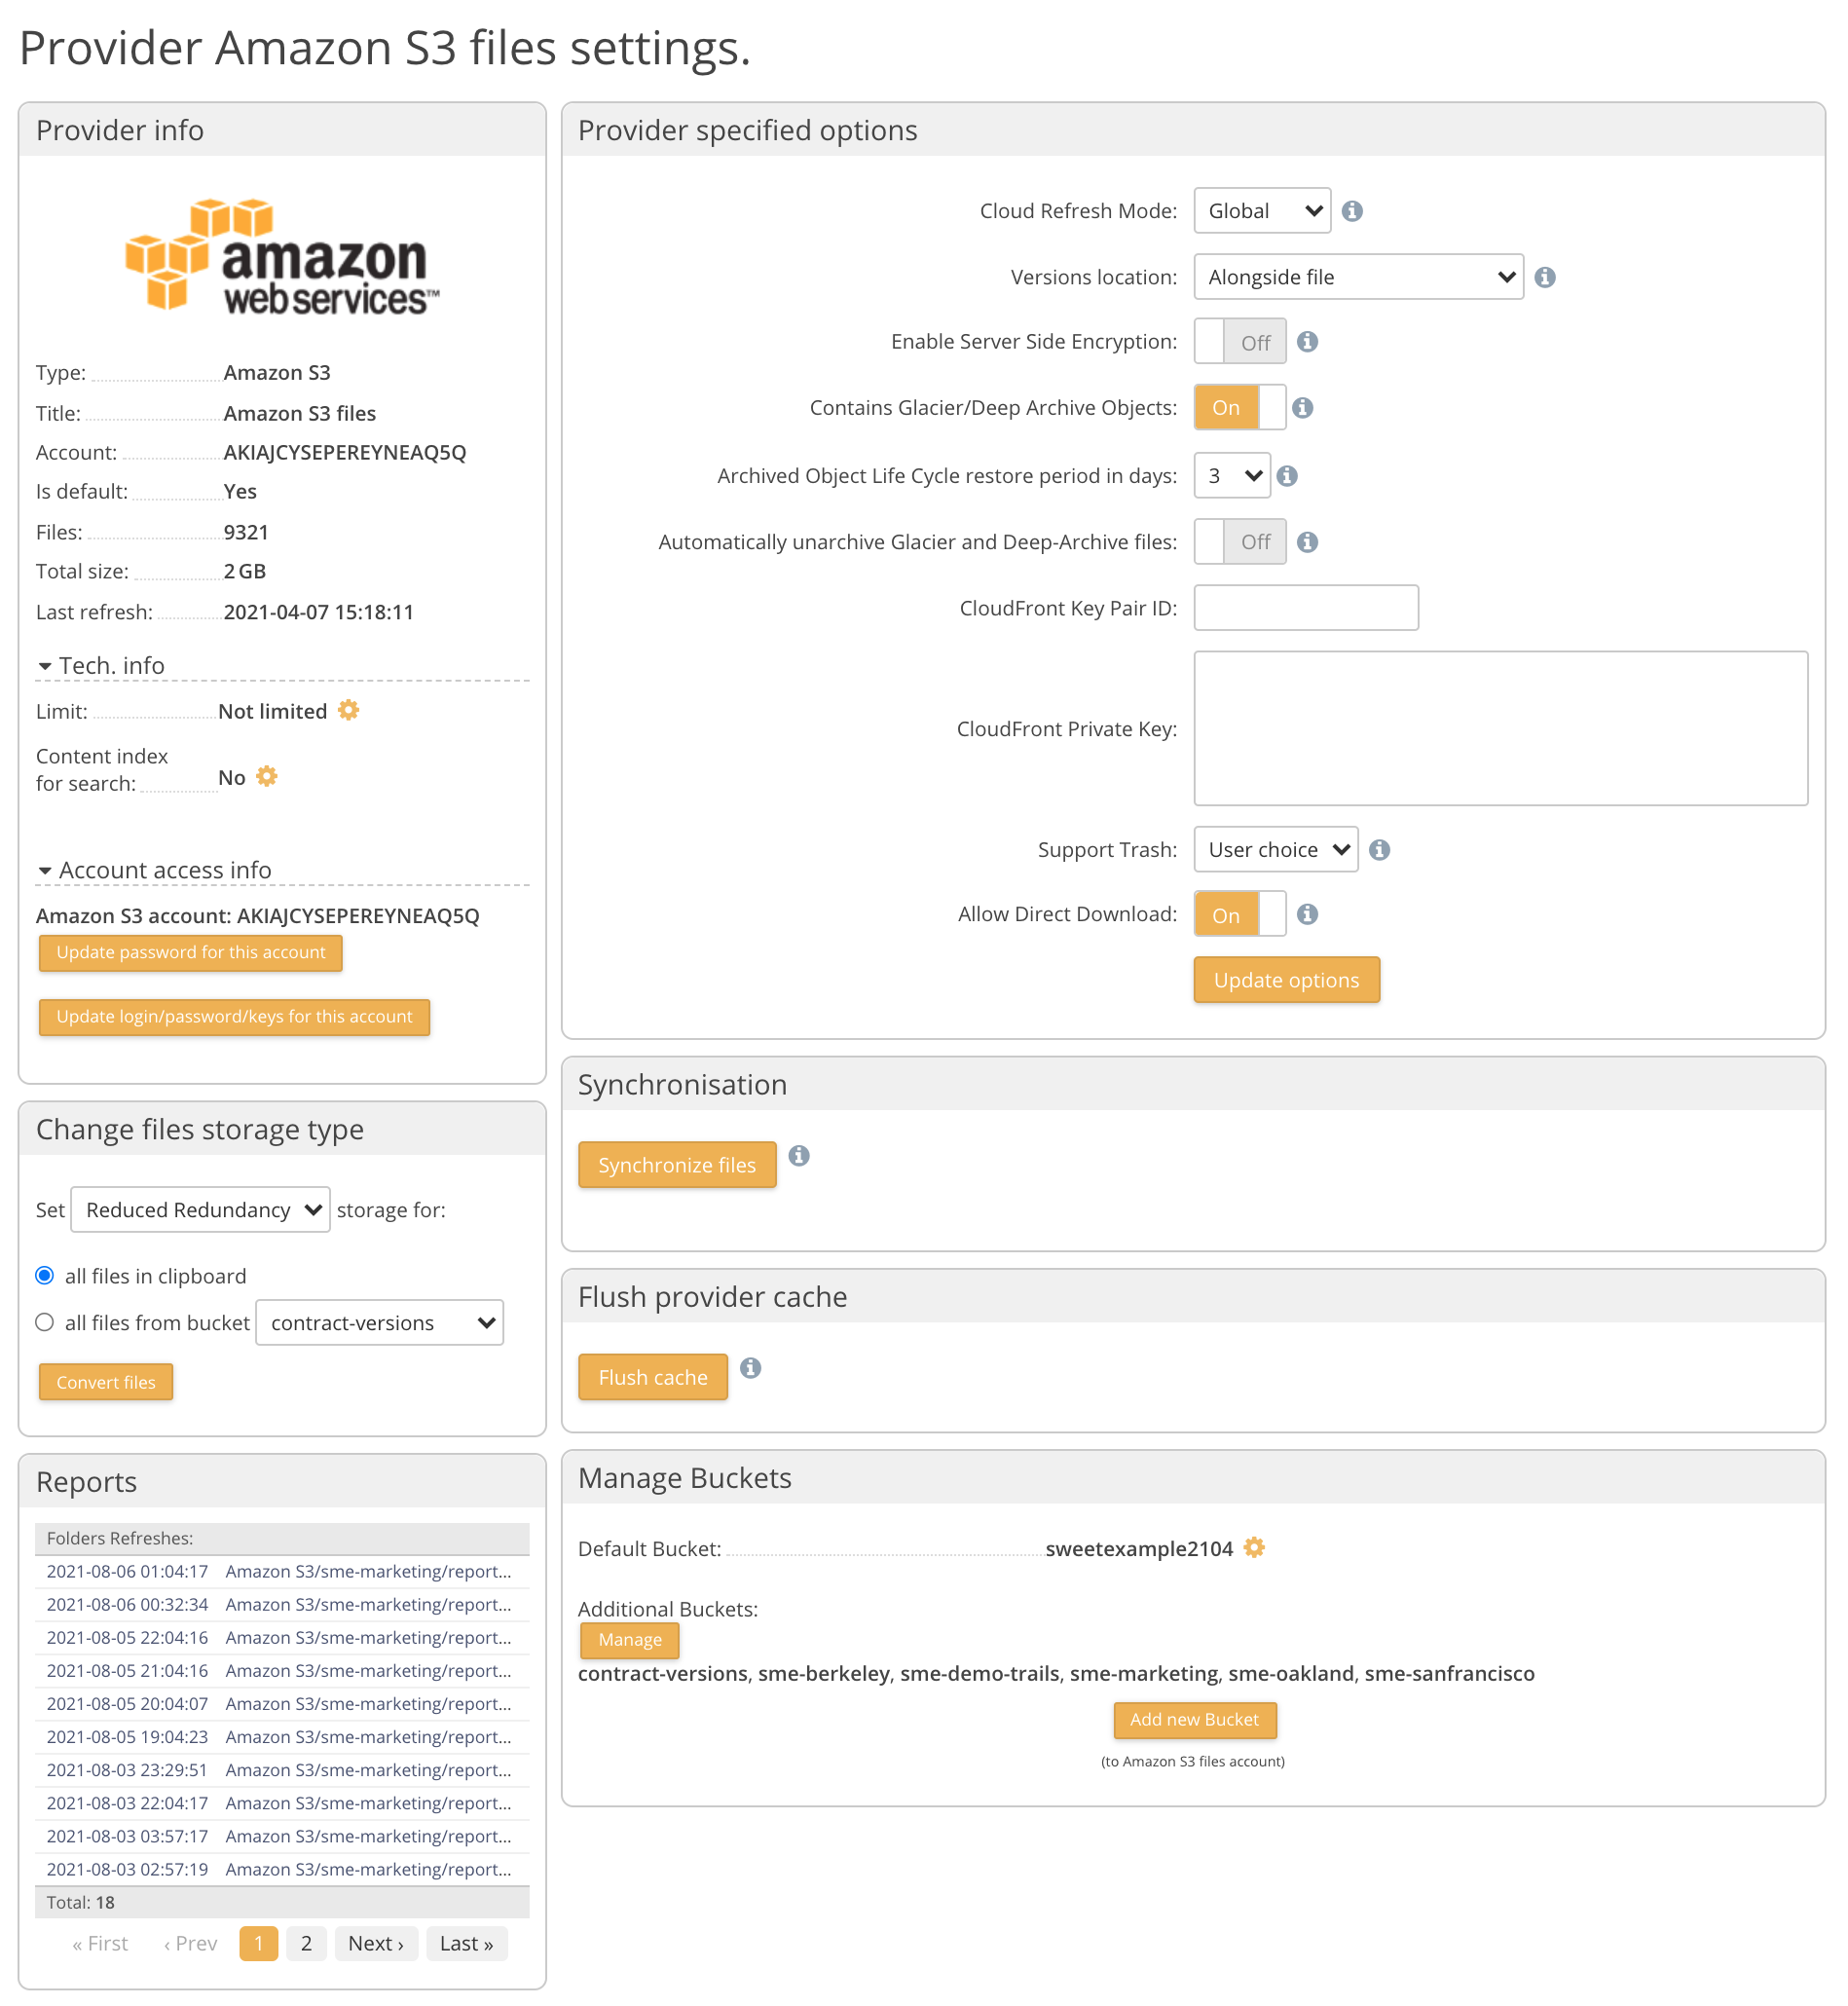 provider-settings-amazons3.png